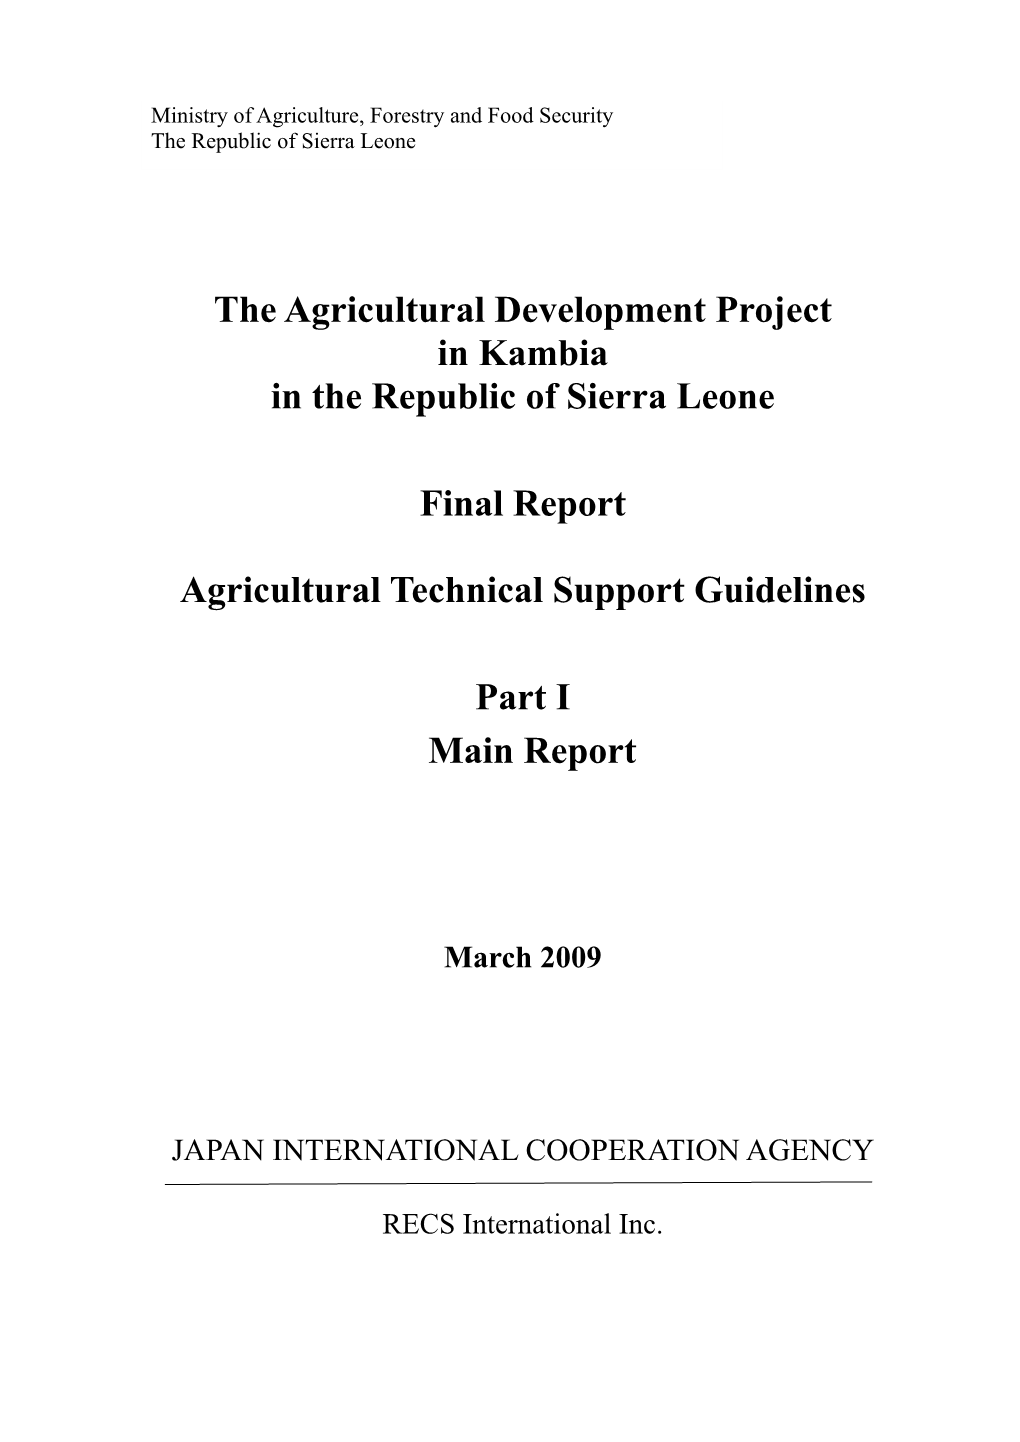 The Agricultural Development Project in Kambia in the Republic of Sierra Leone